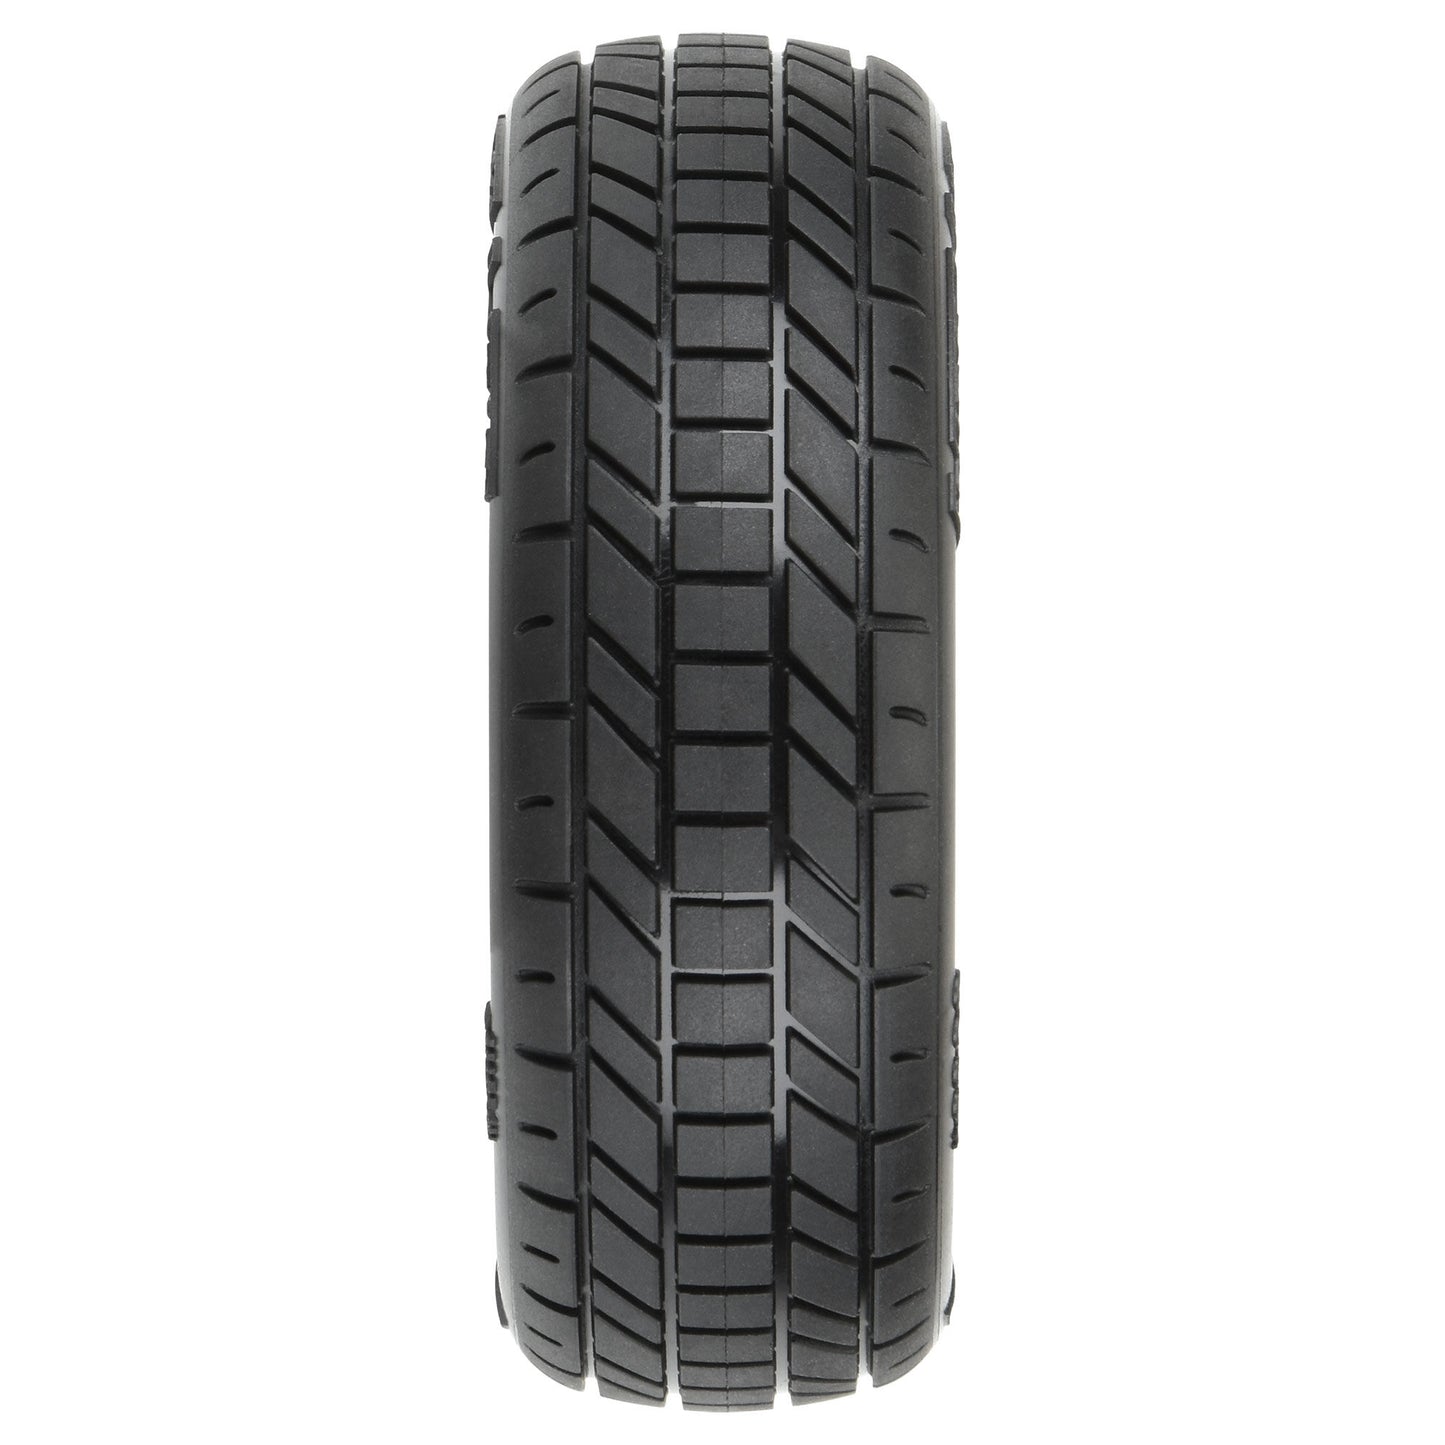 Hot Lap 2.2” 2WD MC (Clay) Dirt Oval Buggy Front Tires (2)